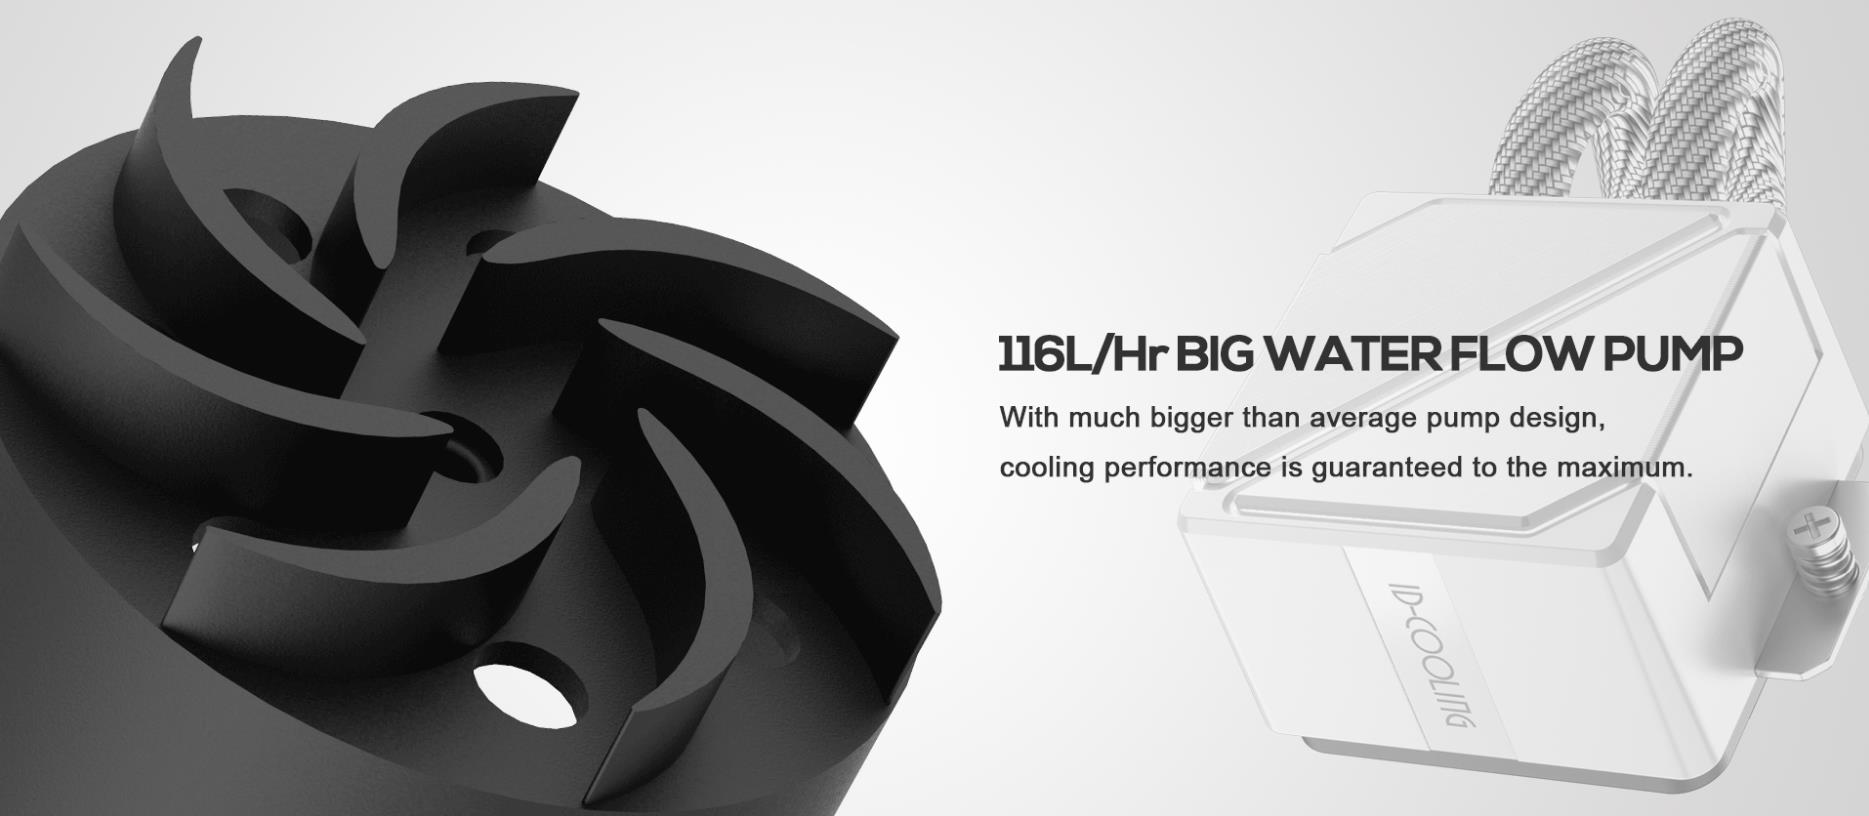 A large marketing image providing additional information about the product ID-COOLING DashFlow 360 Basic 360mm AIO CPU Cooler - White - Additional alt info not provided